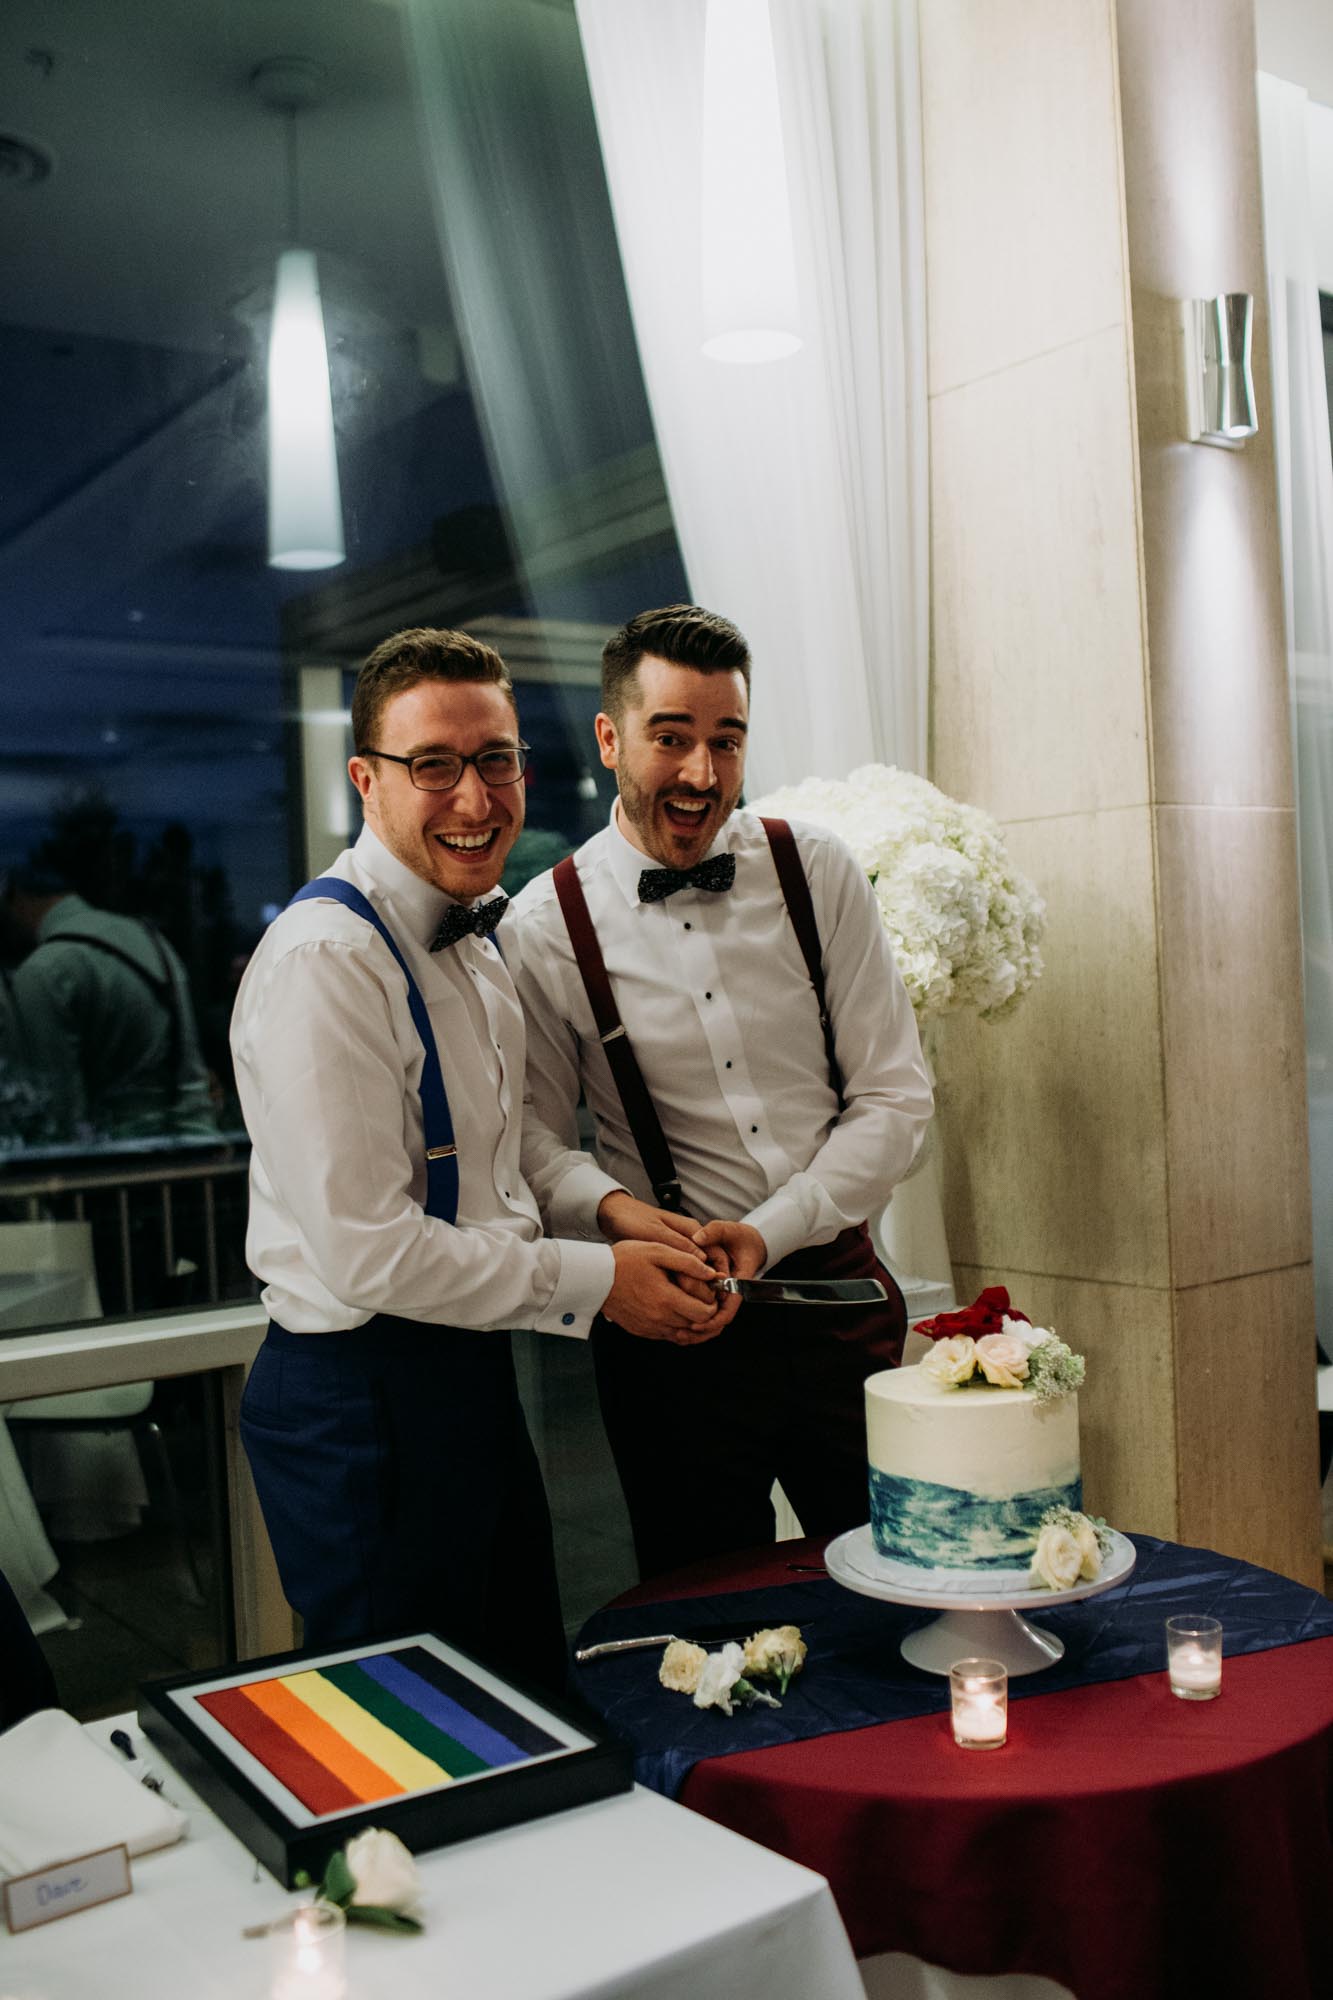 Canadian garden wedding with a hint of sparkle | Shannon-May Photography | Featured on Equally Wed, the leading LGBTQ+ wedding magazine